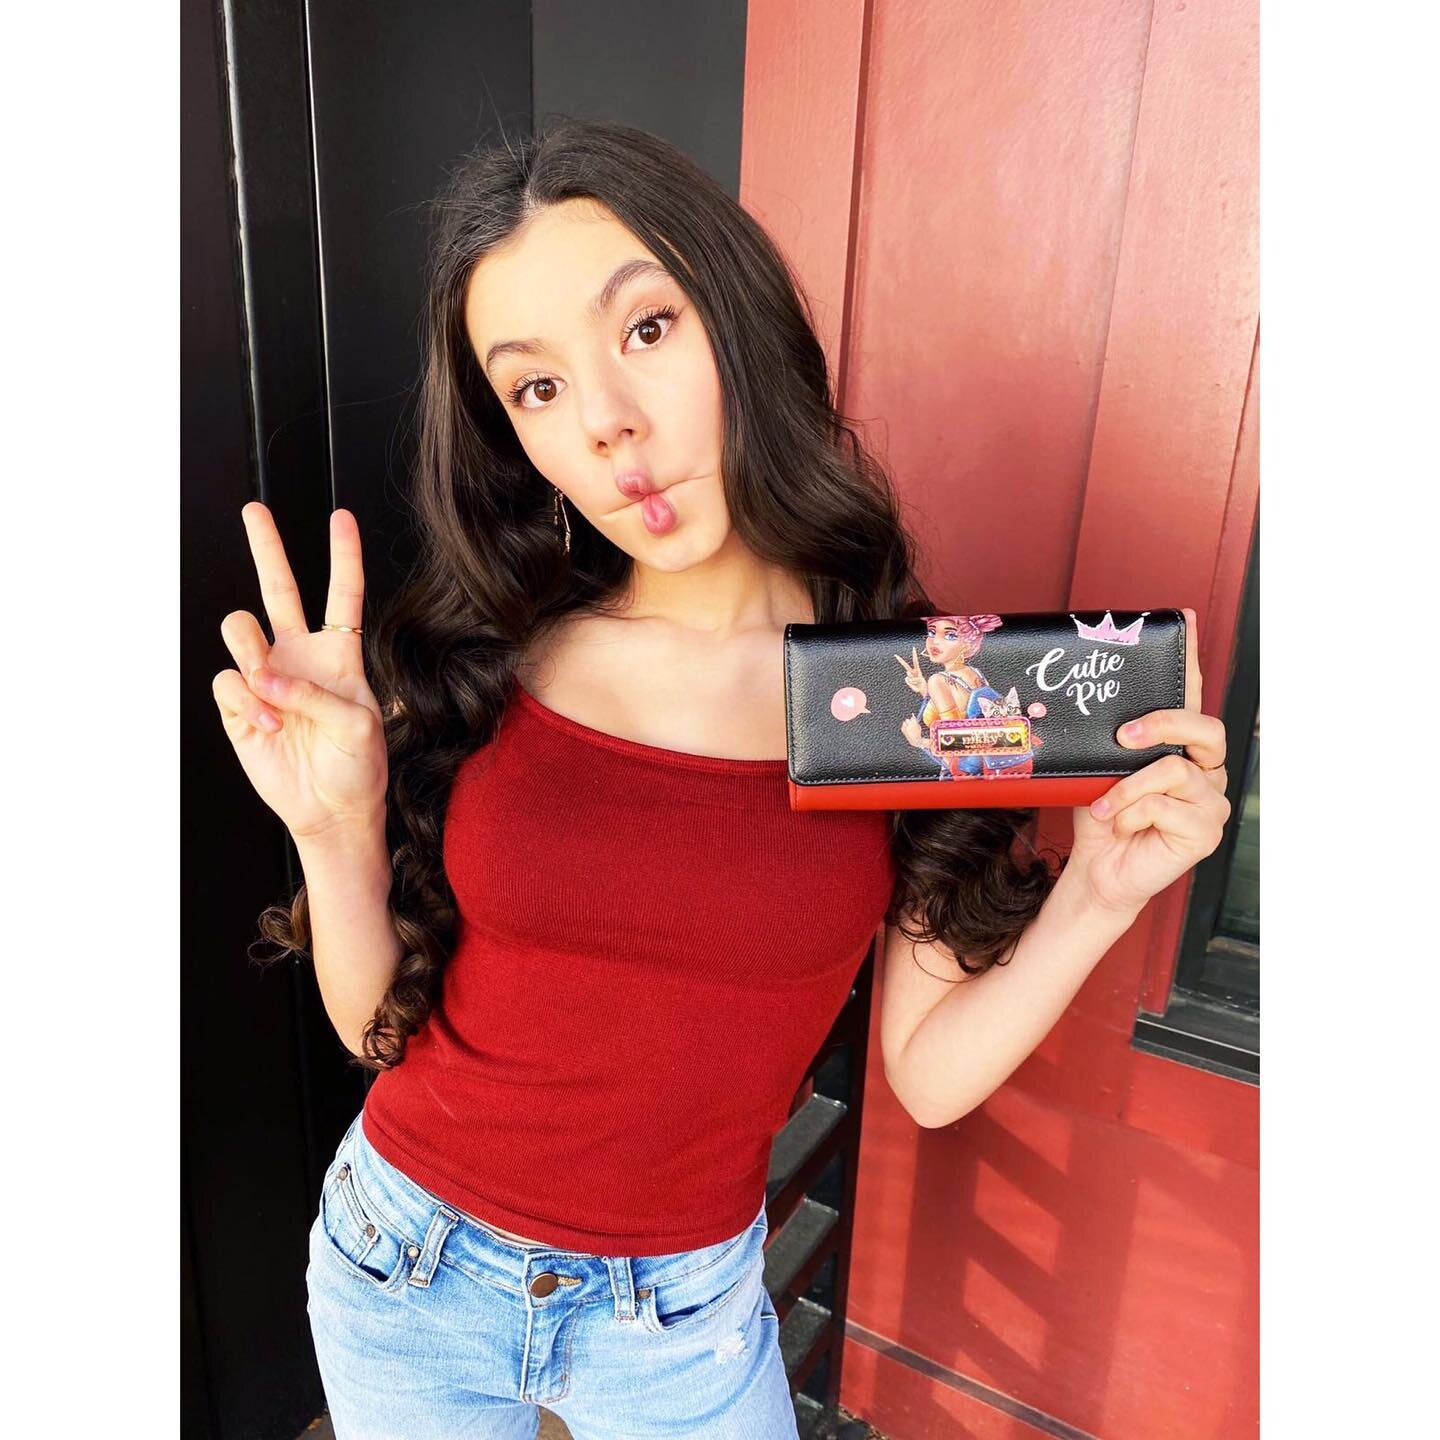 Our lovely Nikky model Noella with the nikky Trifold Wallet! Feel fun and chic using this cute accessory wallet!👛💕🥰 Tap the picture to see prices or visit our official website nicoleleeusa.com/nl-stores to find your nearest distributor to shop our